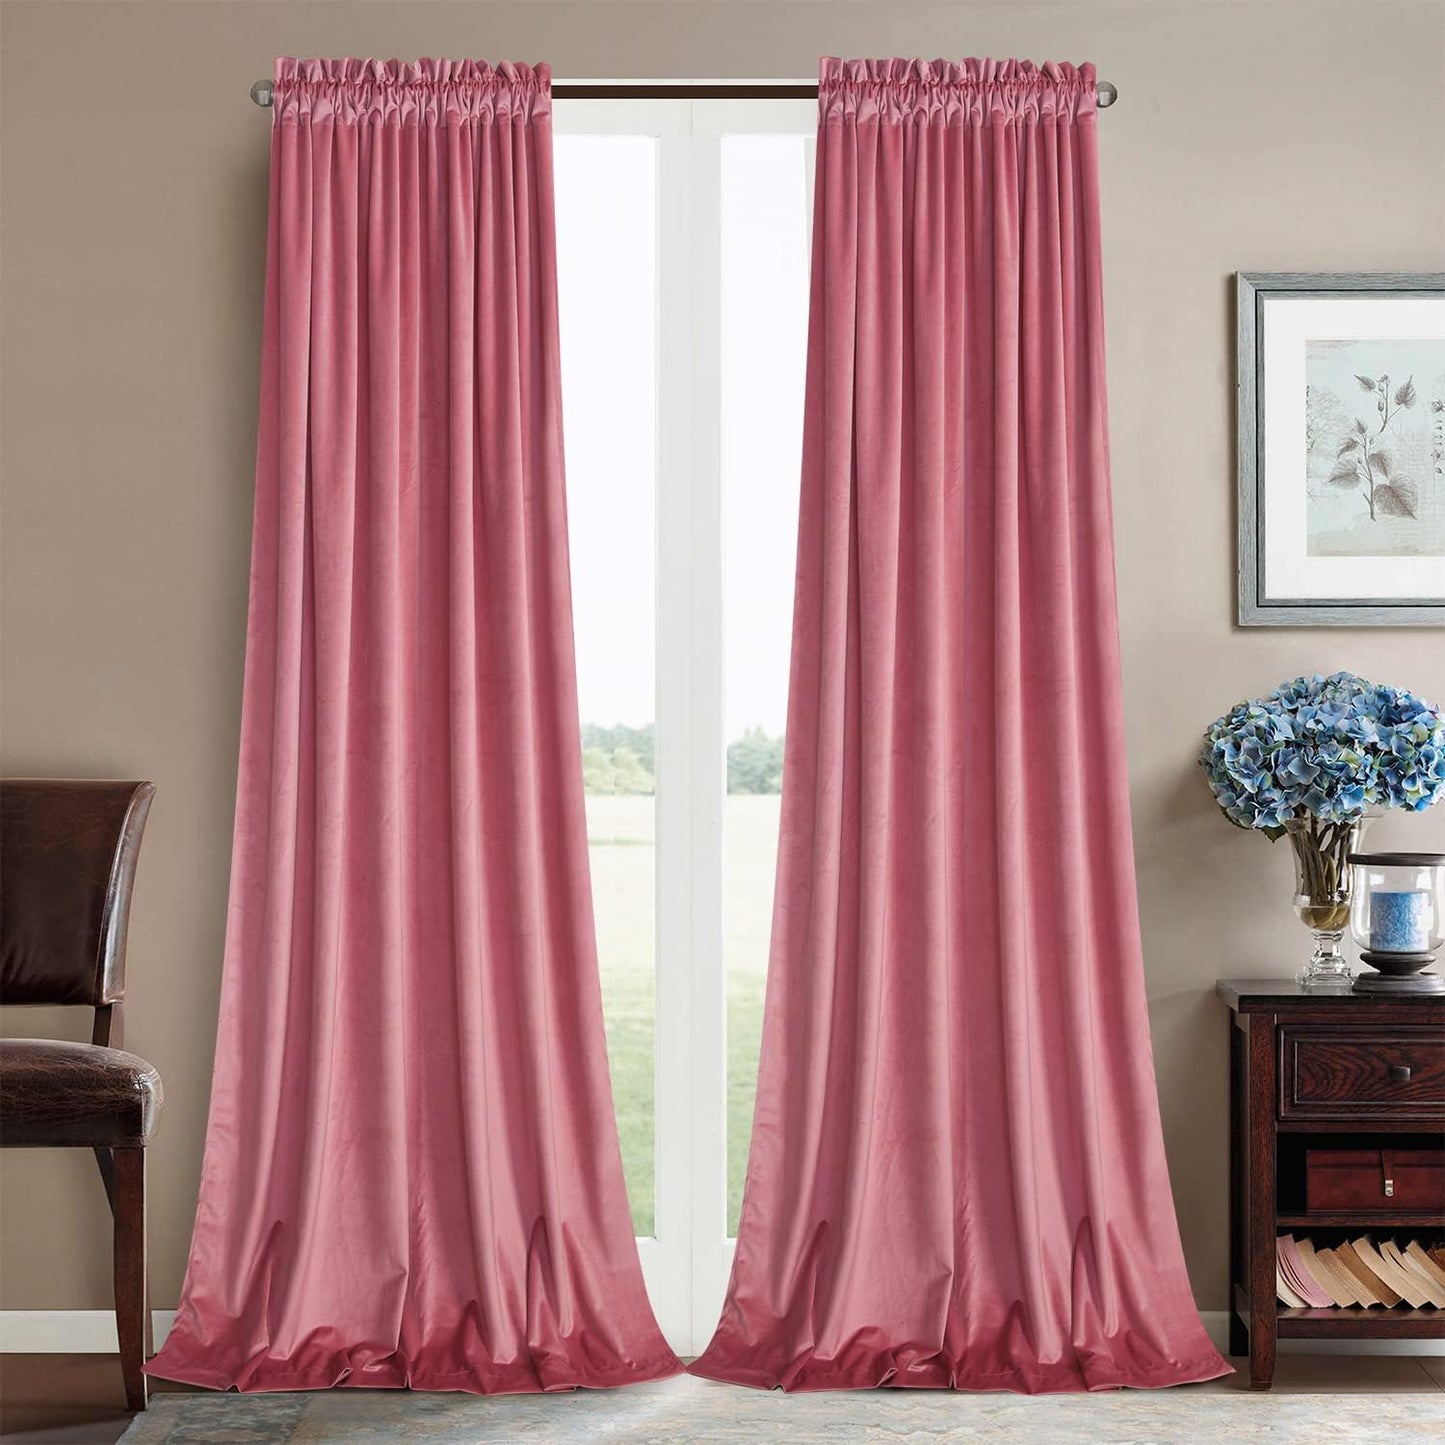 Roslynwood Home Velvet Bright Orange Curtain 84 Inch - Heavy Duty Curtains Energy Efficient Block Light Rod Pocket Drapes Window Covering Set for Home Theatre/Living Room, 52Wx84L Orange/2 Panels  Roslyn decor Candy Pink 52"Wx63"L (2 Panels) 